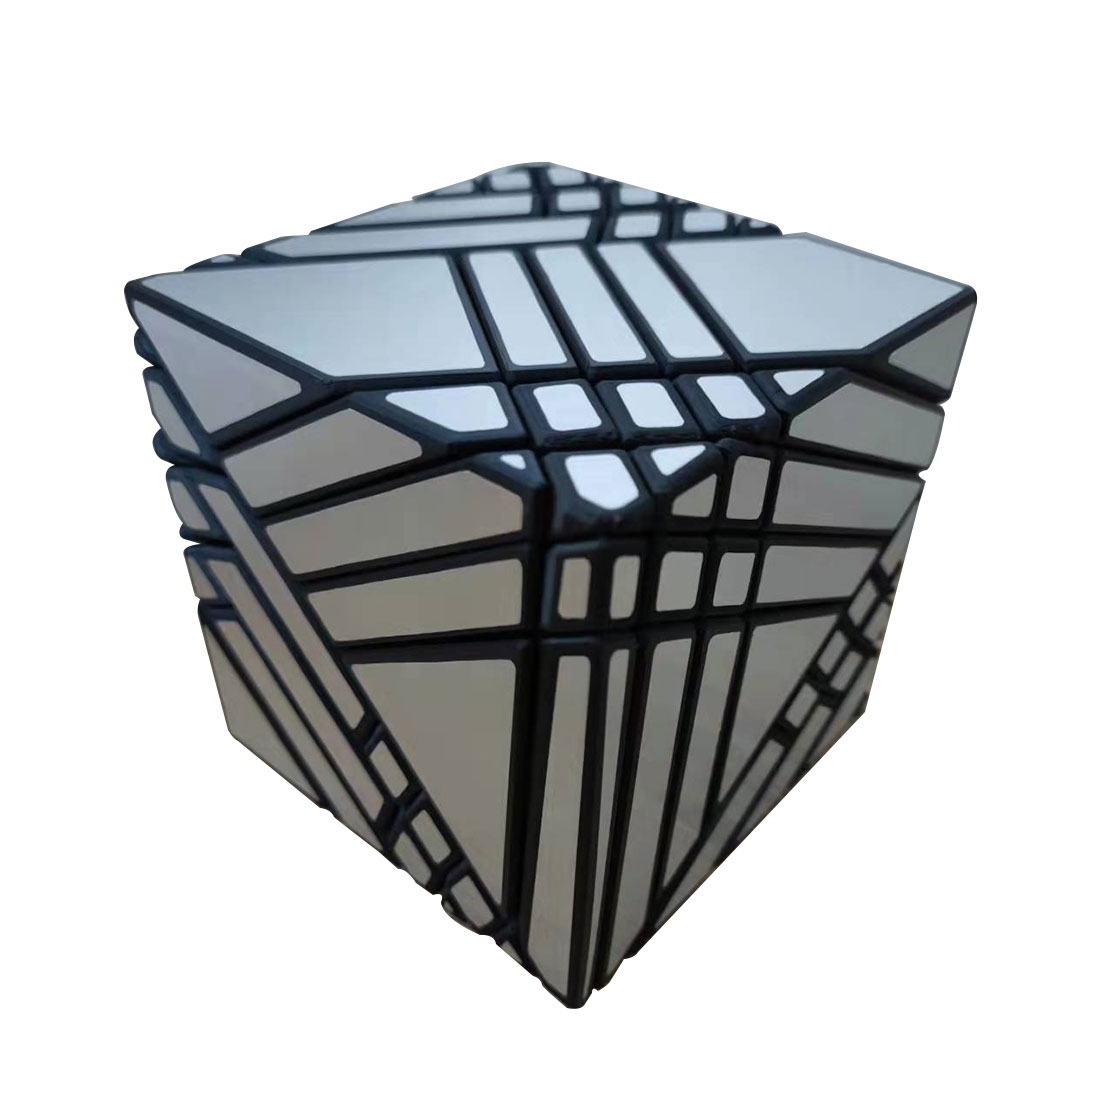 3D Printed 5x5 Ghost Cube